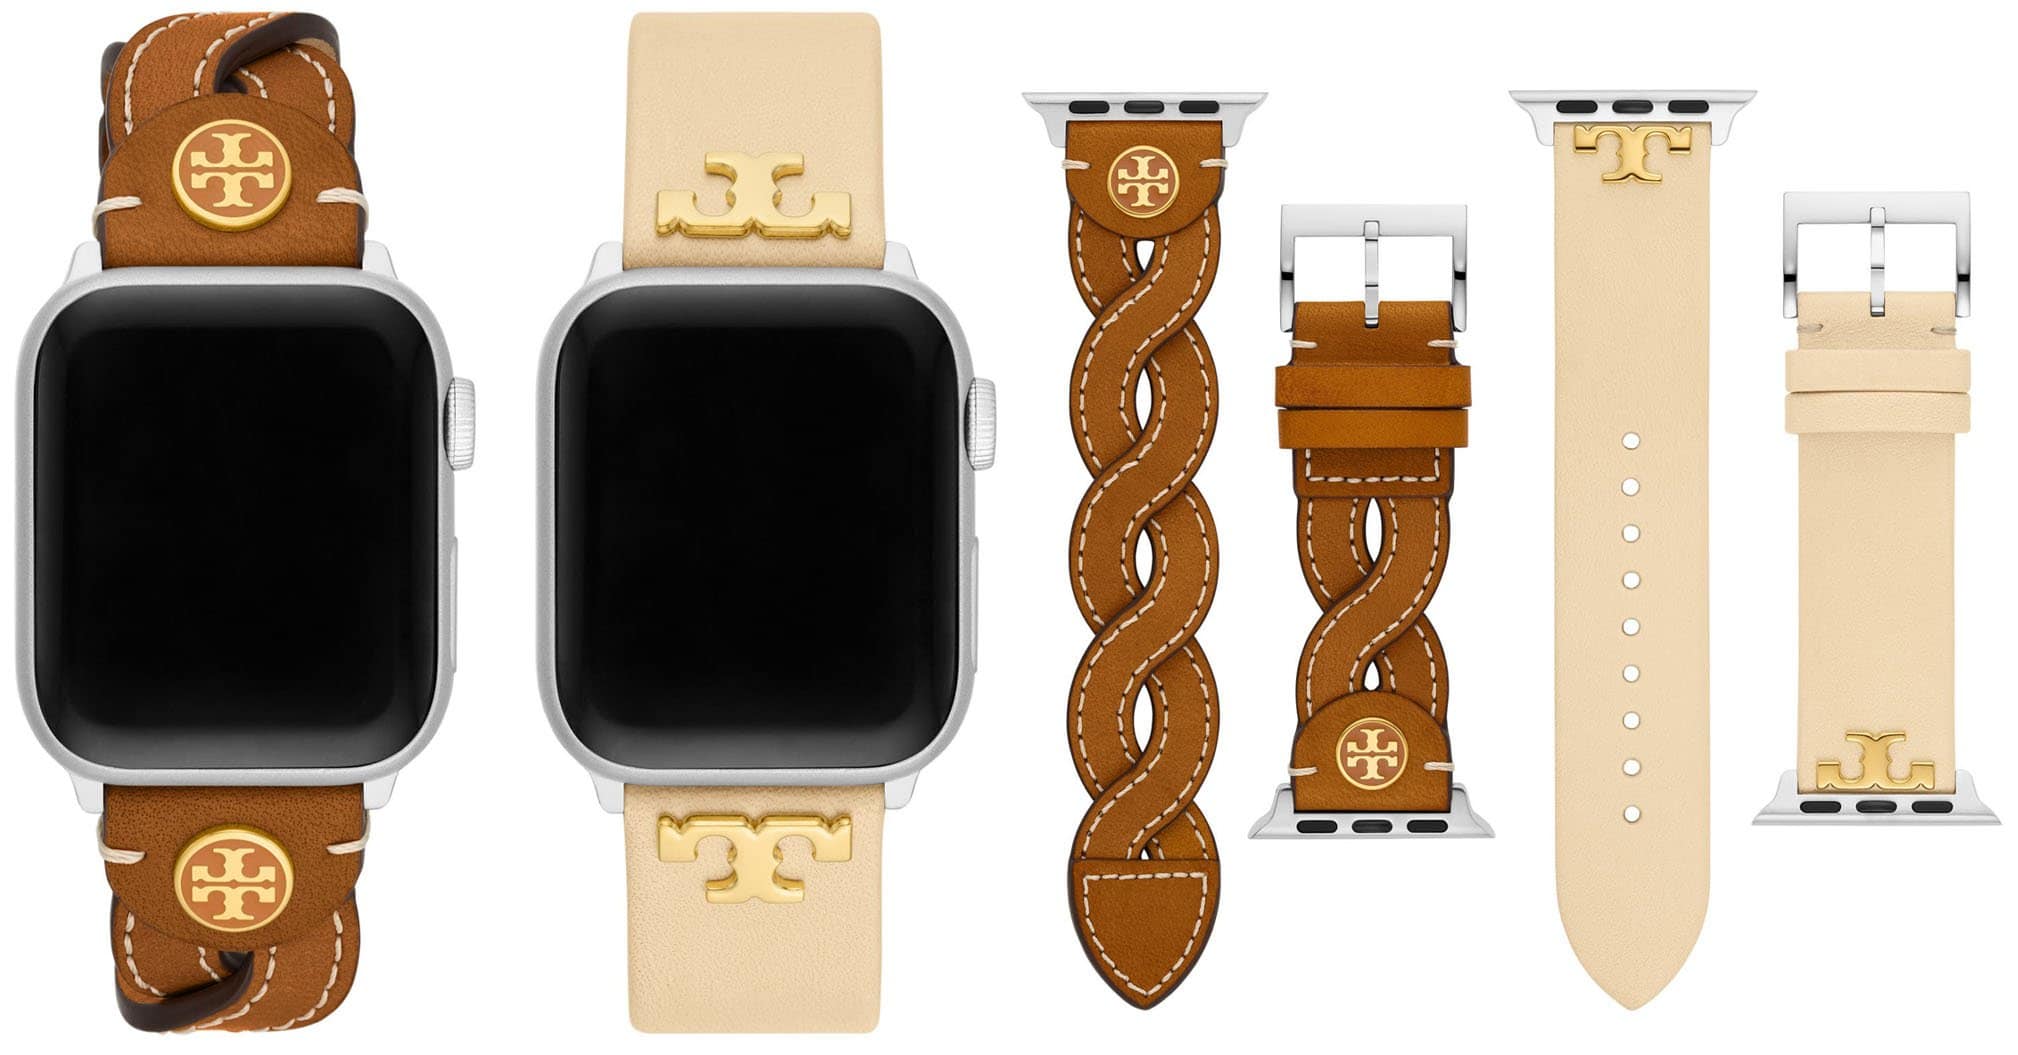 This Tory Burch Apple Watch gift set includes two straps, one braided and one solid, both featuring the brand's signature double-T logo medallion